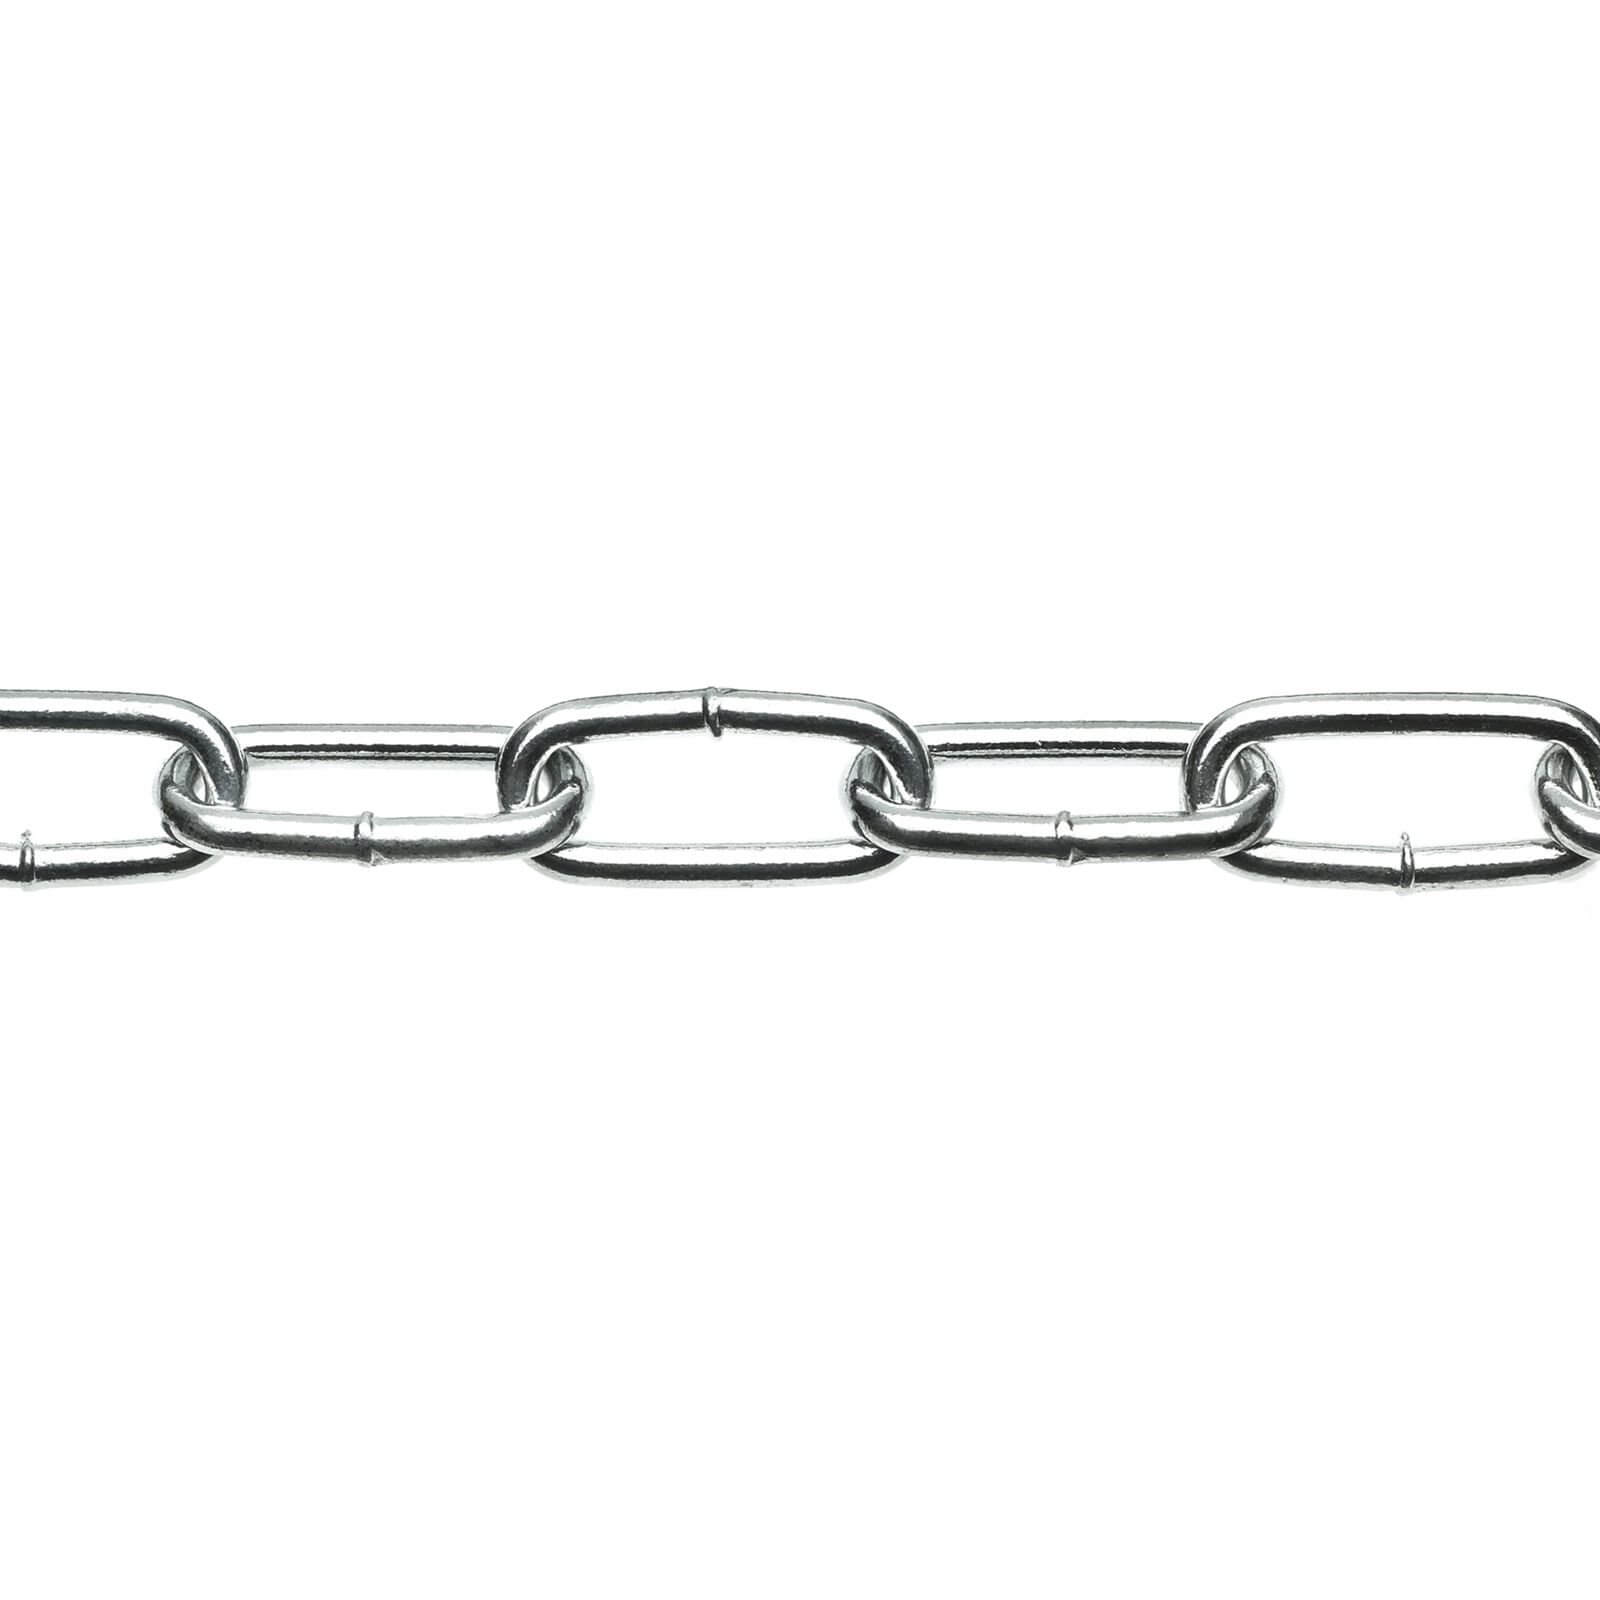 Photo of Long Link Welded Chain - Bright Zinc Plated - 6mm